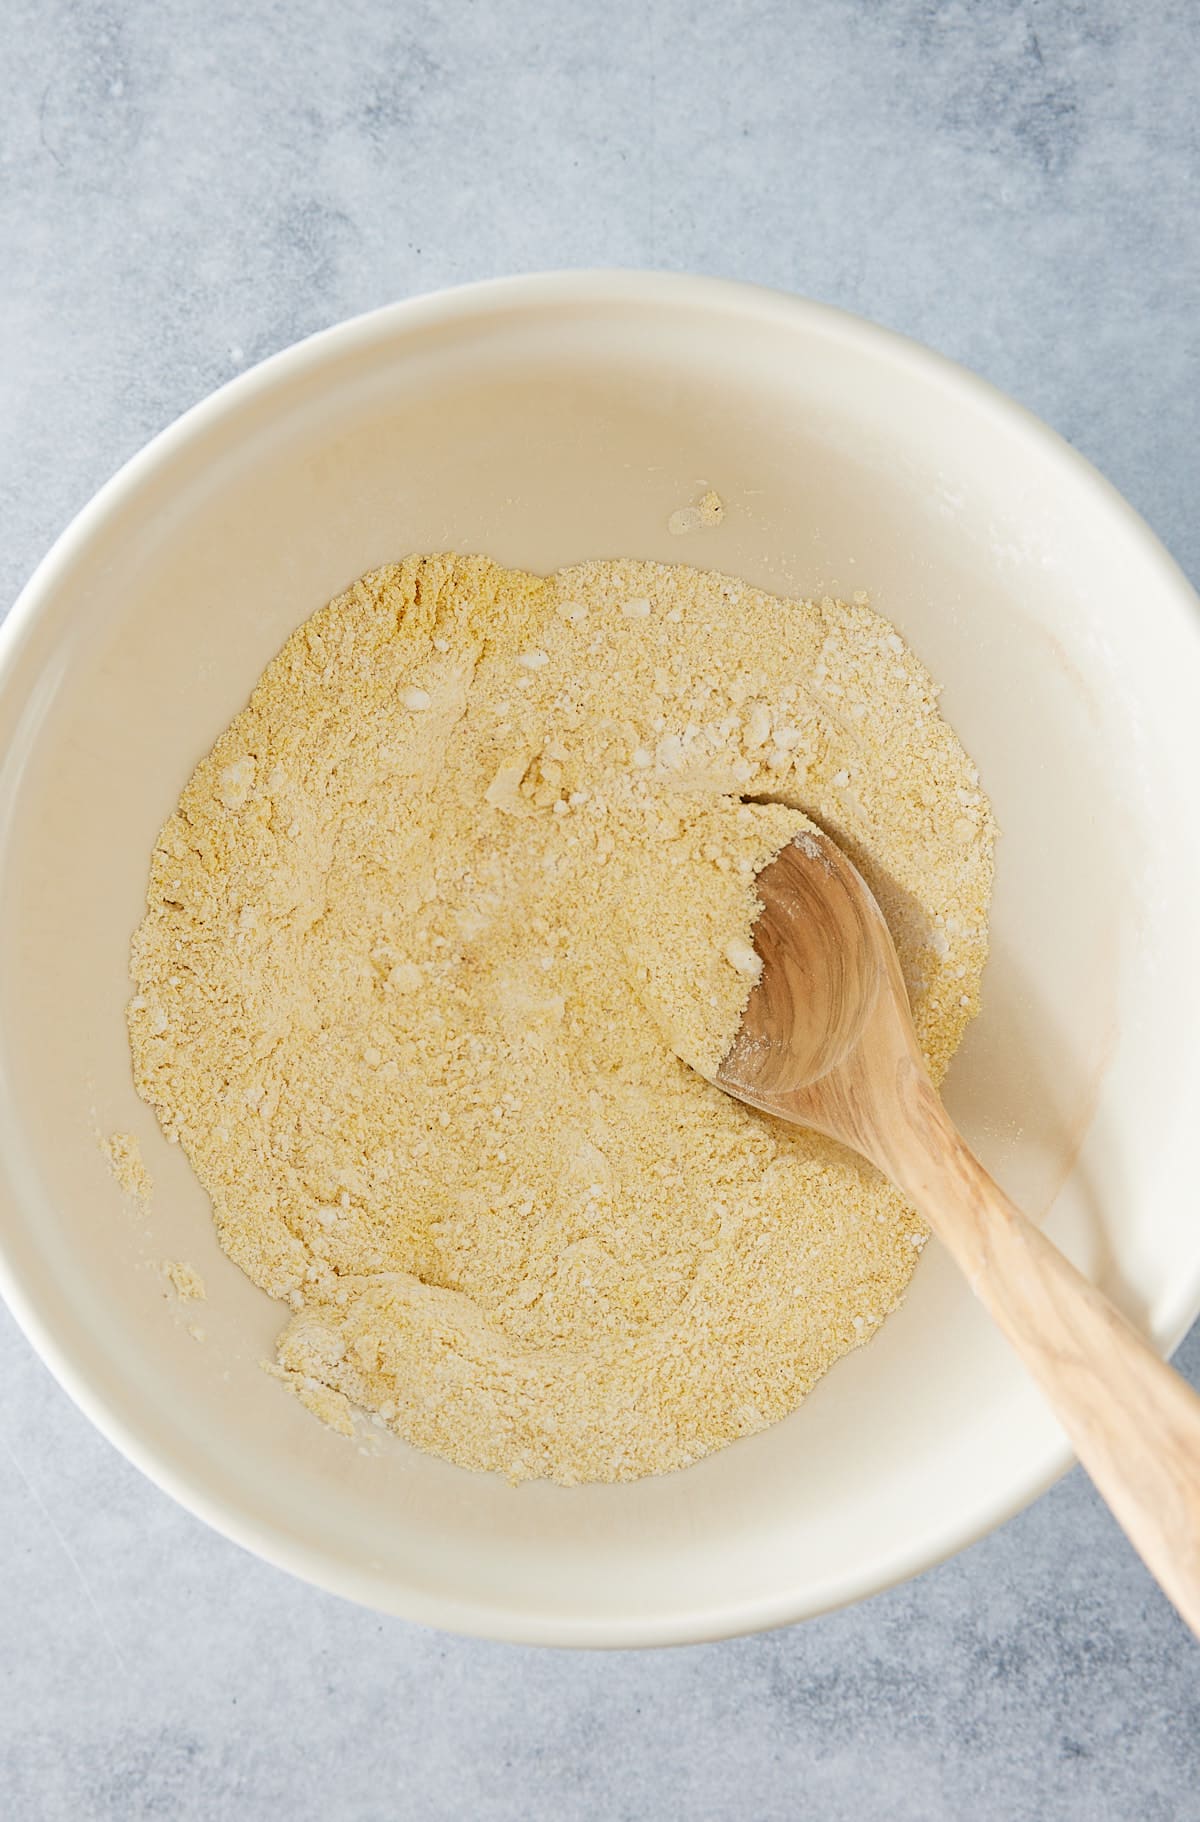 Large white mixing bowl filled with cornmeal and flour